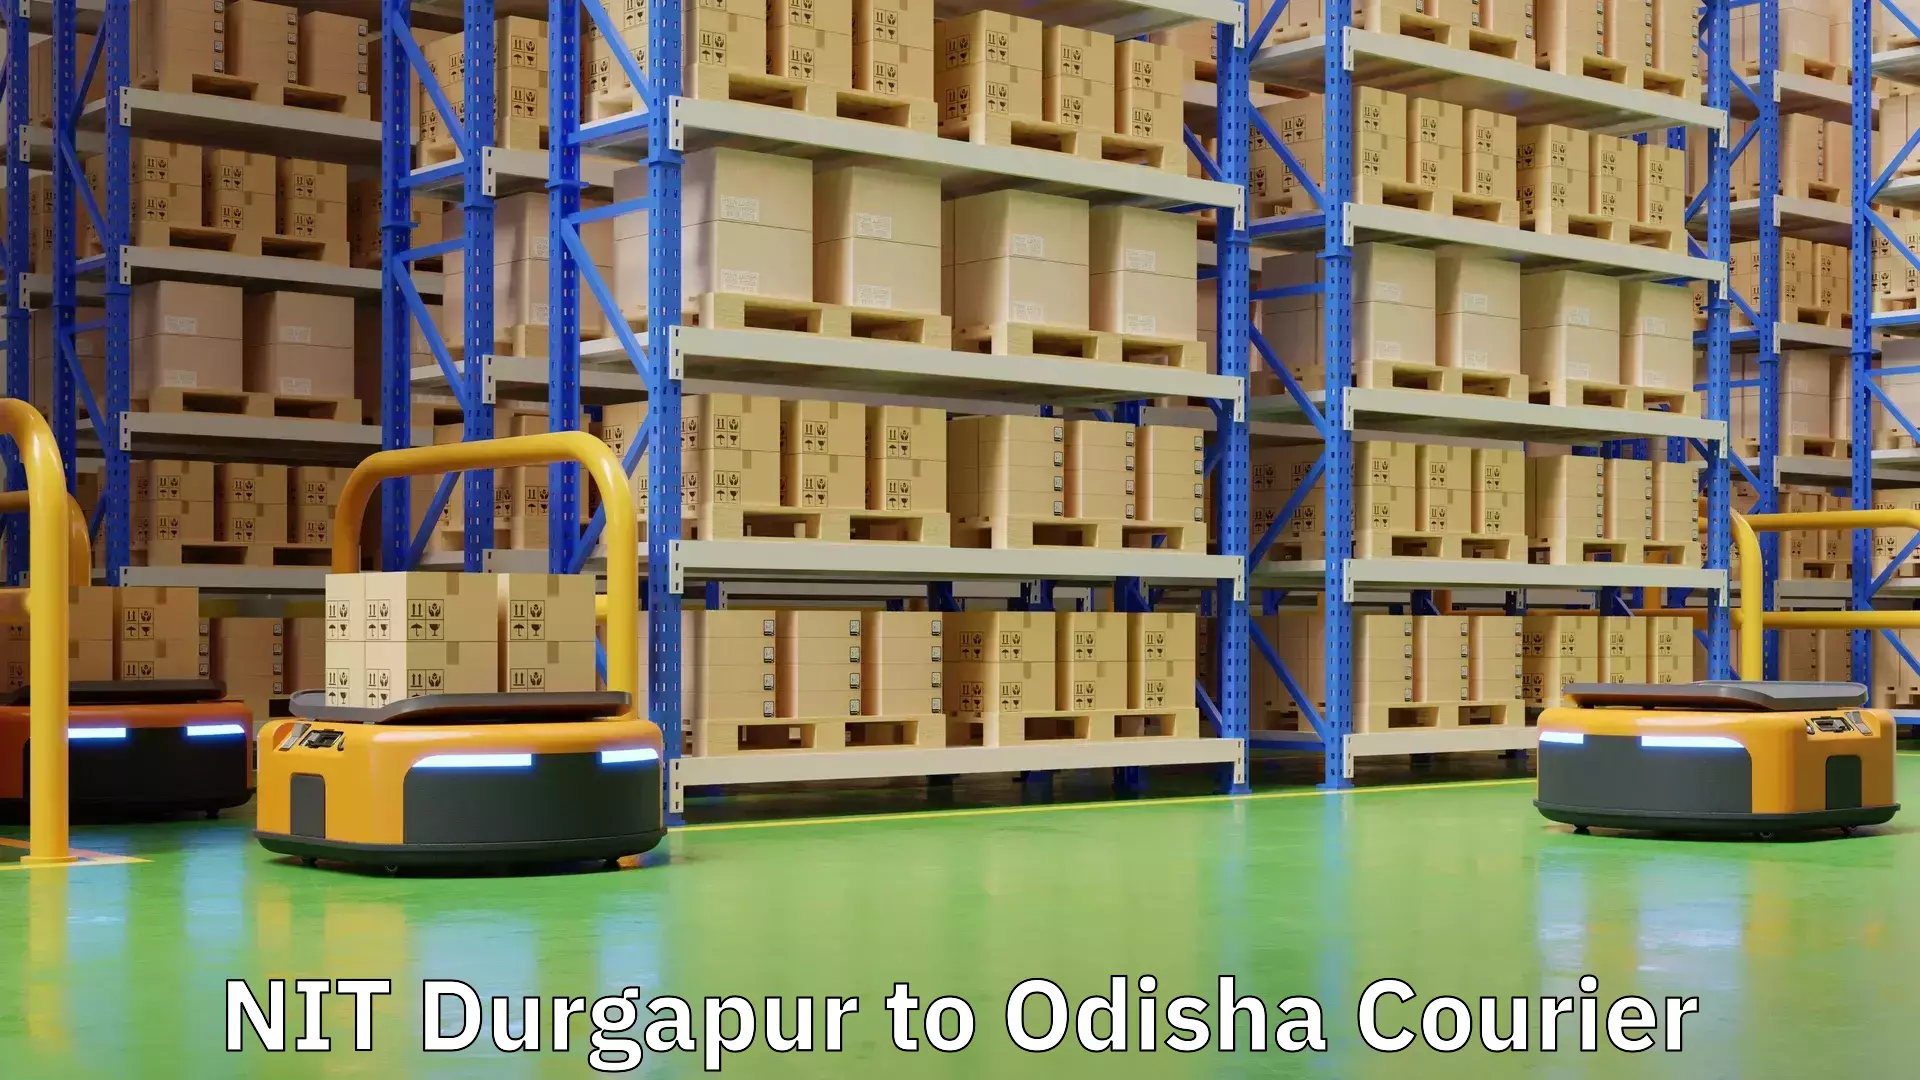 Express courier facilities NIT Durgapur to Odisha